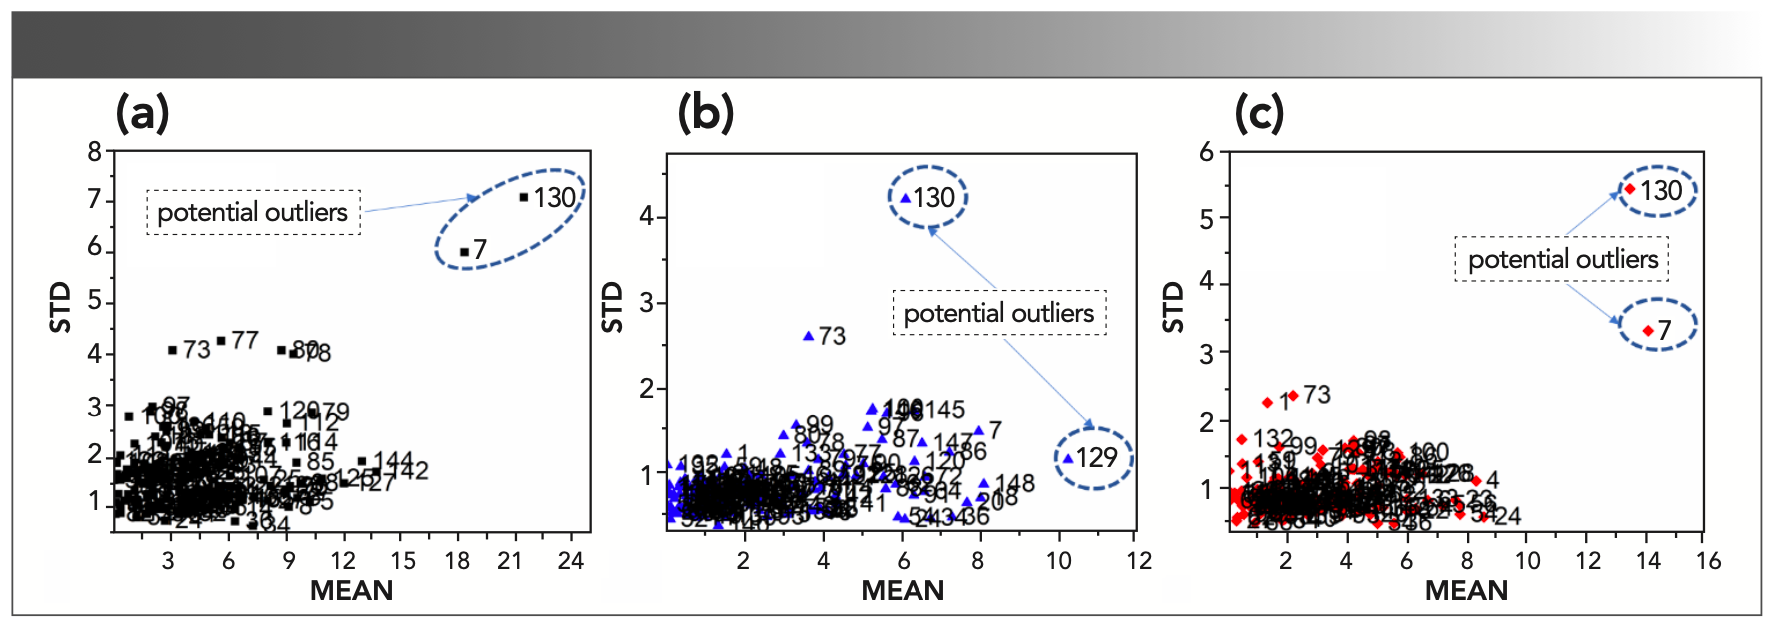 FIGURE 2: Scatter plots of MEAN versus STD for (a) cellulose, (b) hemicellulose, and (c) lignin.